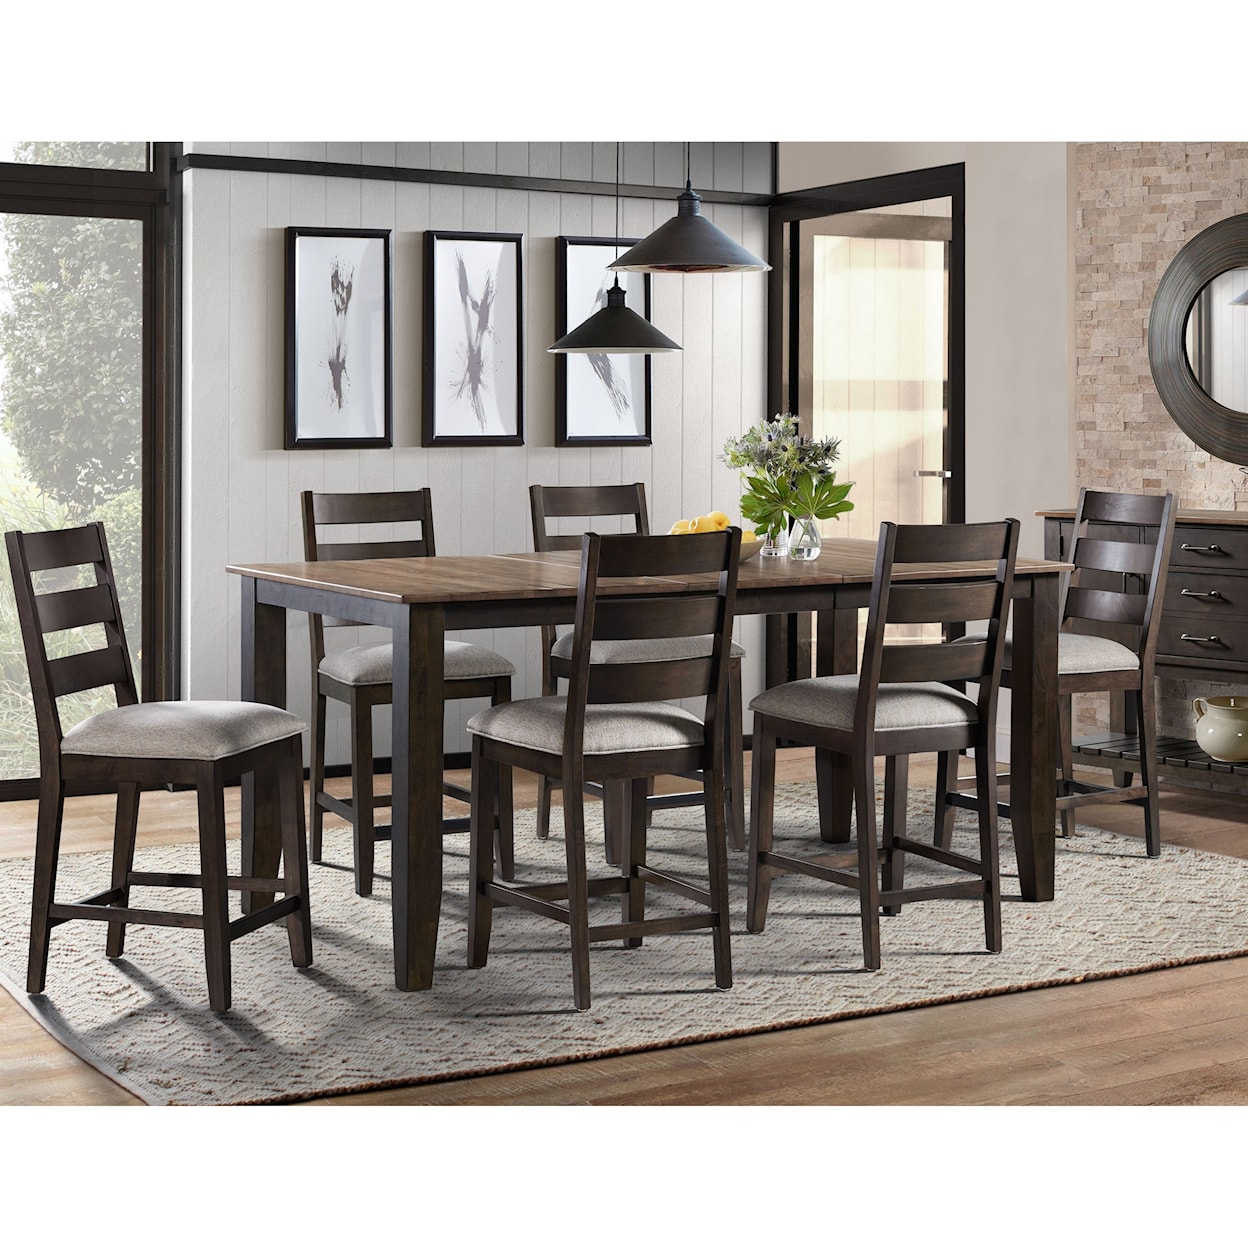 Intercon Beacon 7-Piece Counter Height Table and Chair Set